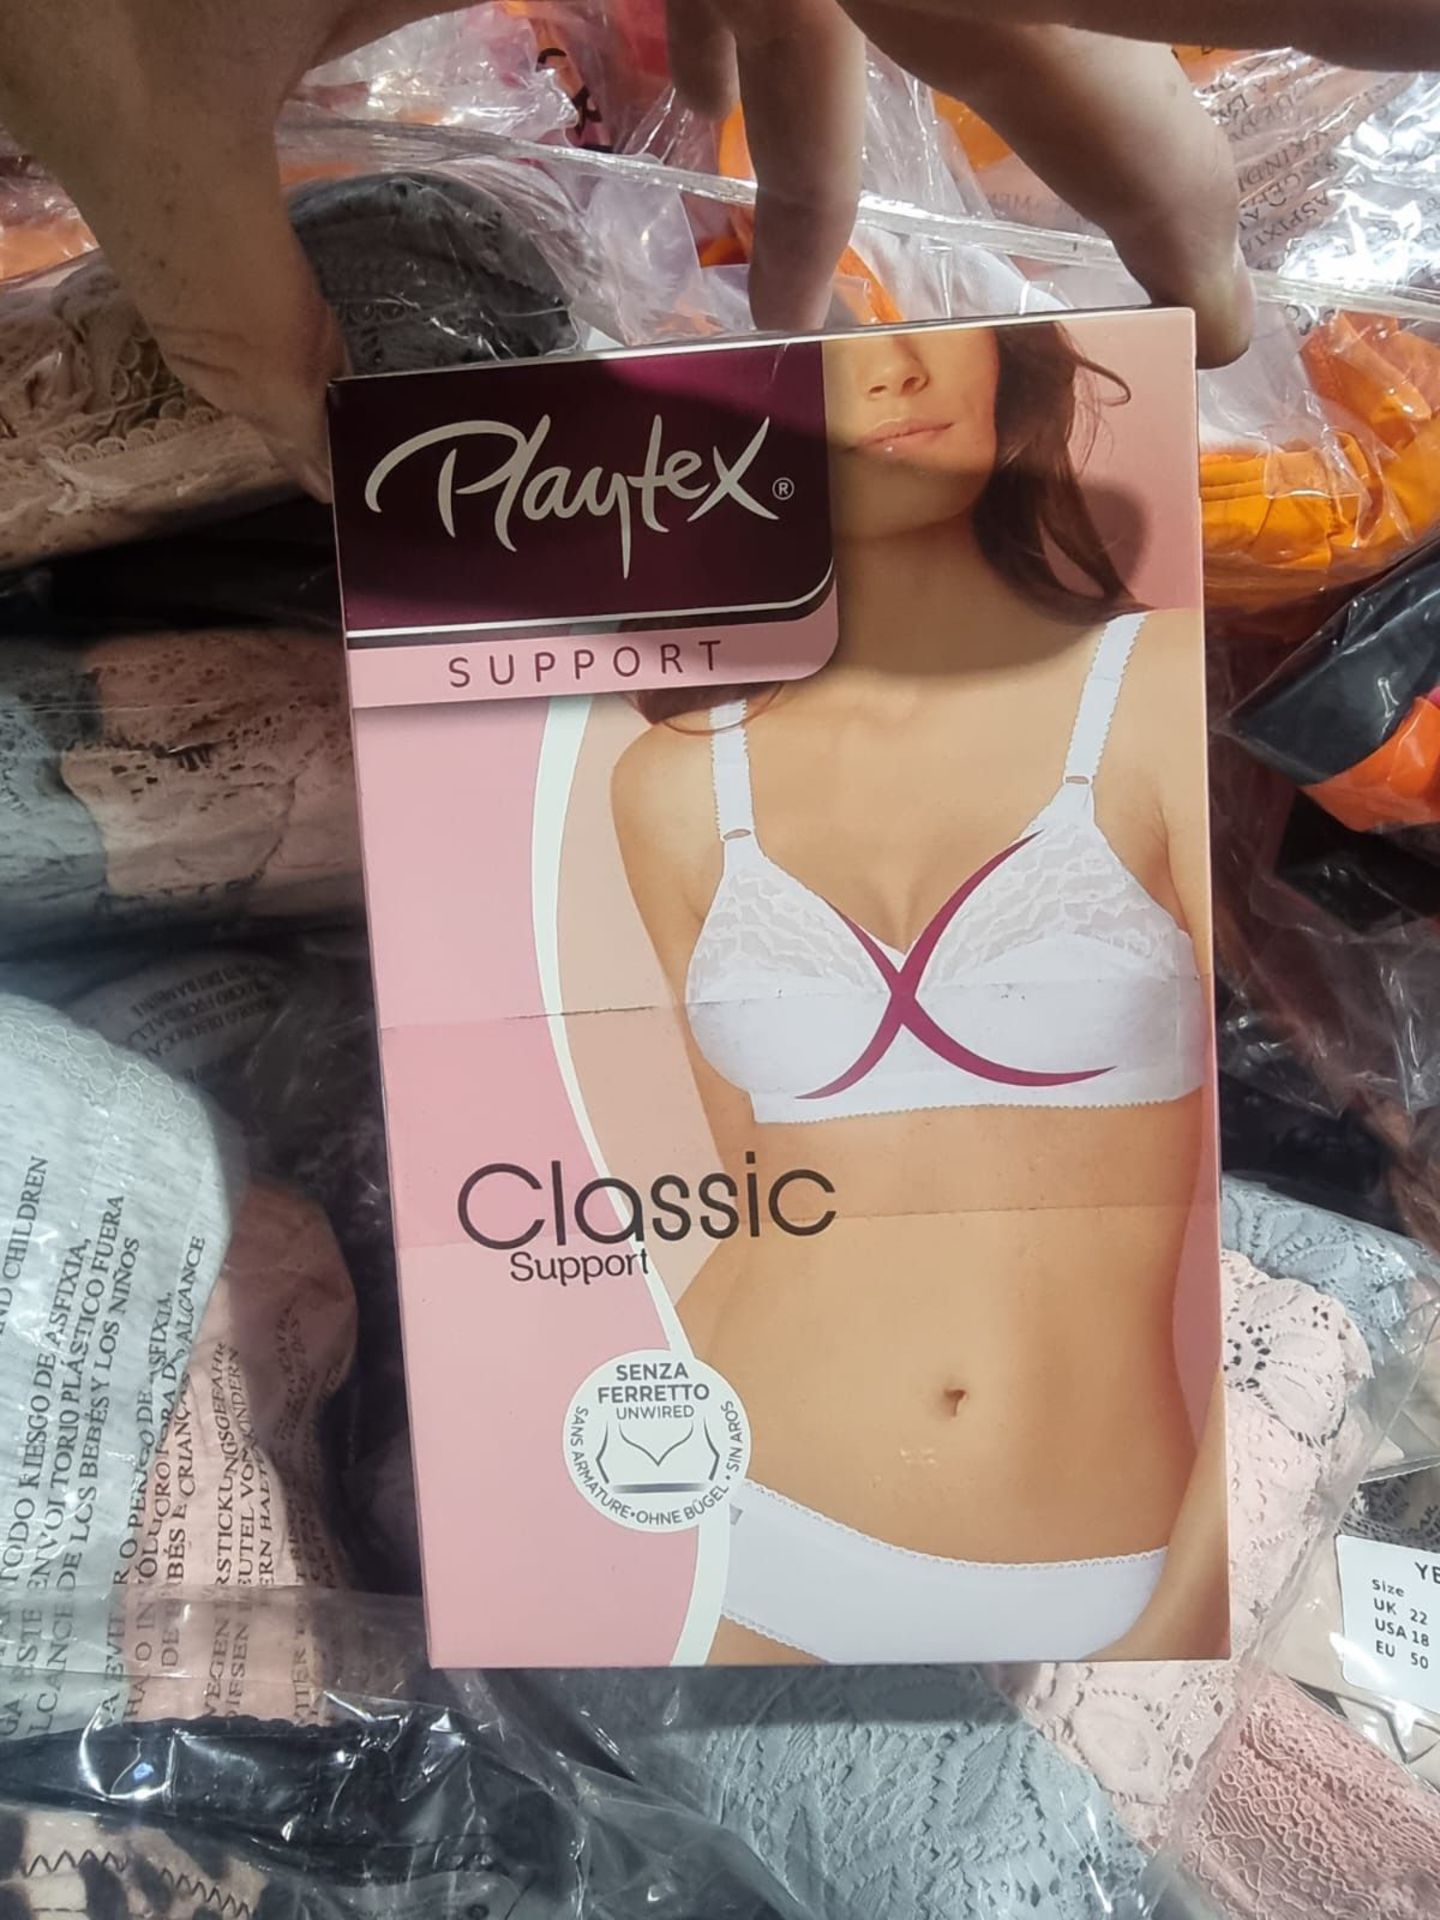 100 x NEW PACKAGED ASSORTED SWIM & UNDERWEAR FROM BRAND SUCH AS WONDERBRA, BOUX AVENUE, ANN SUMMERS, - Image 10 of 53